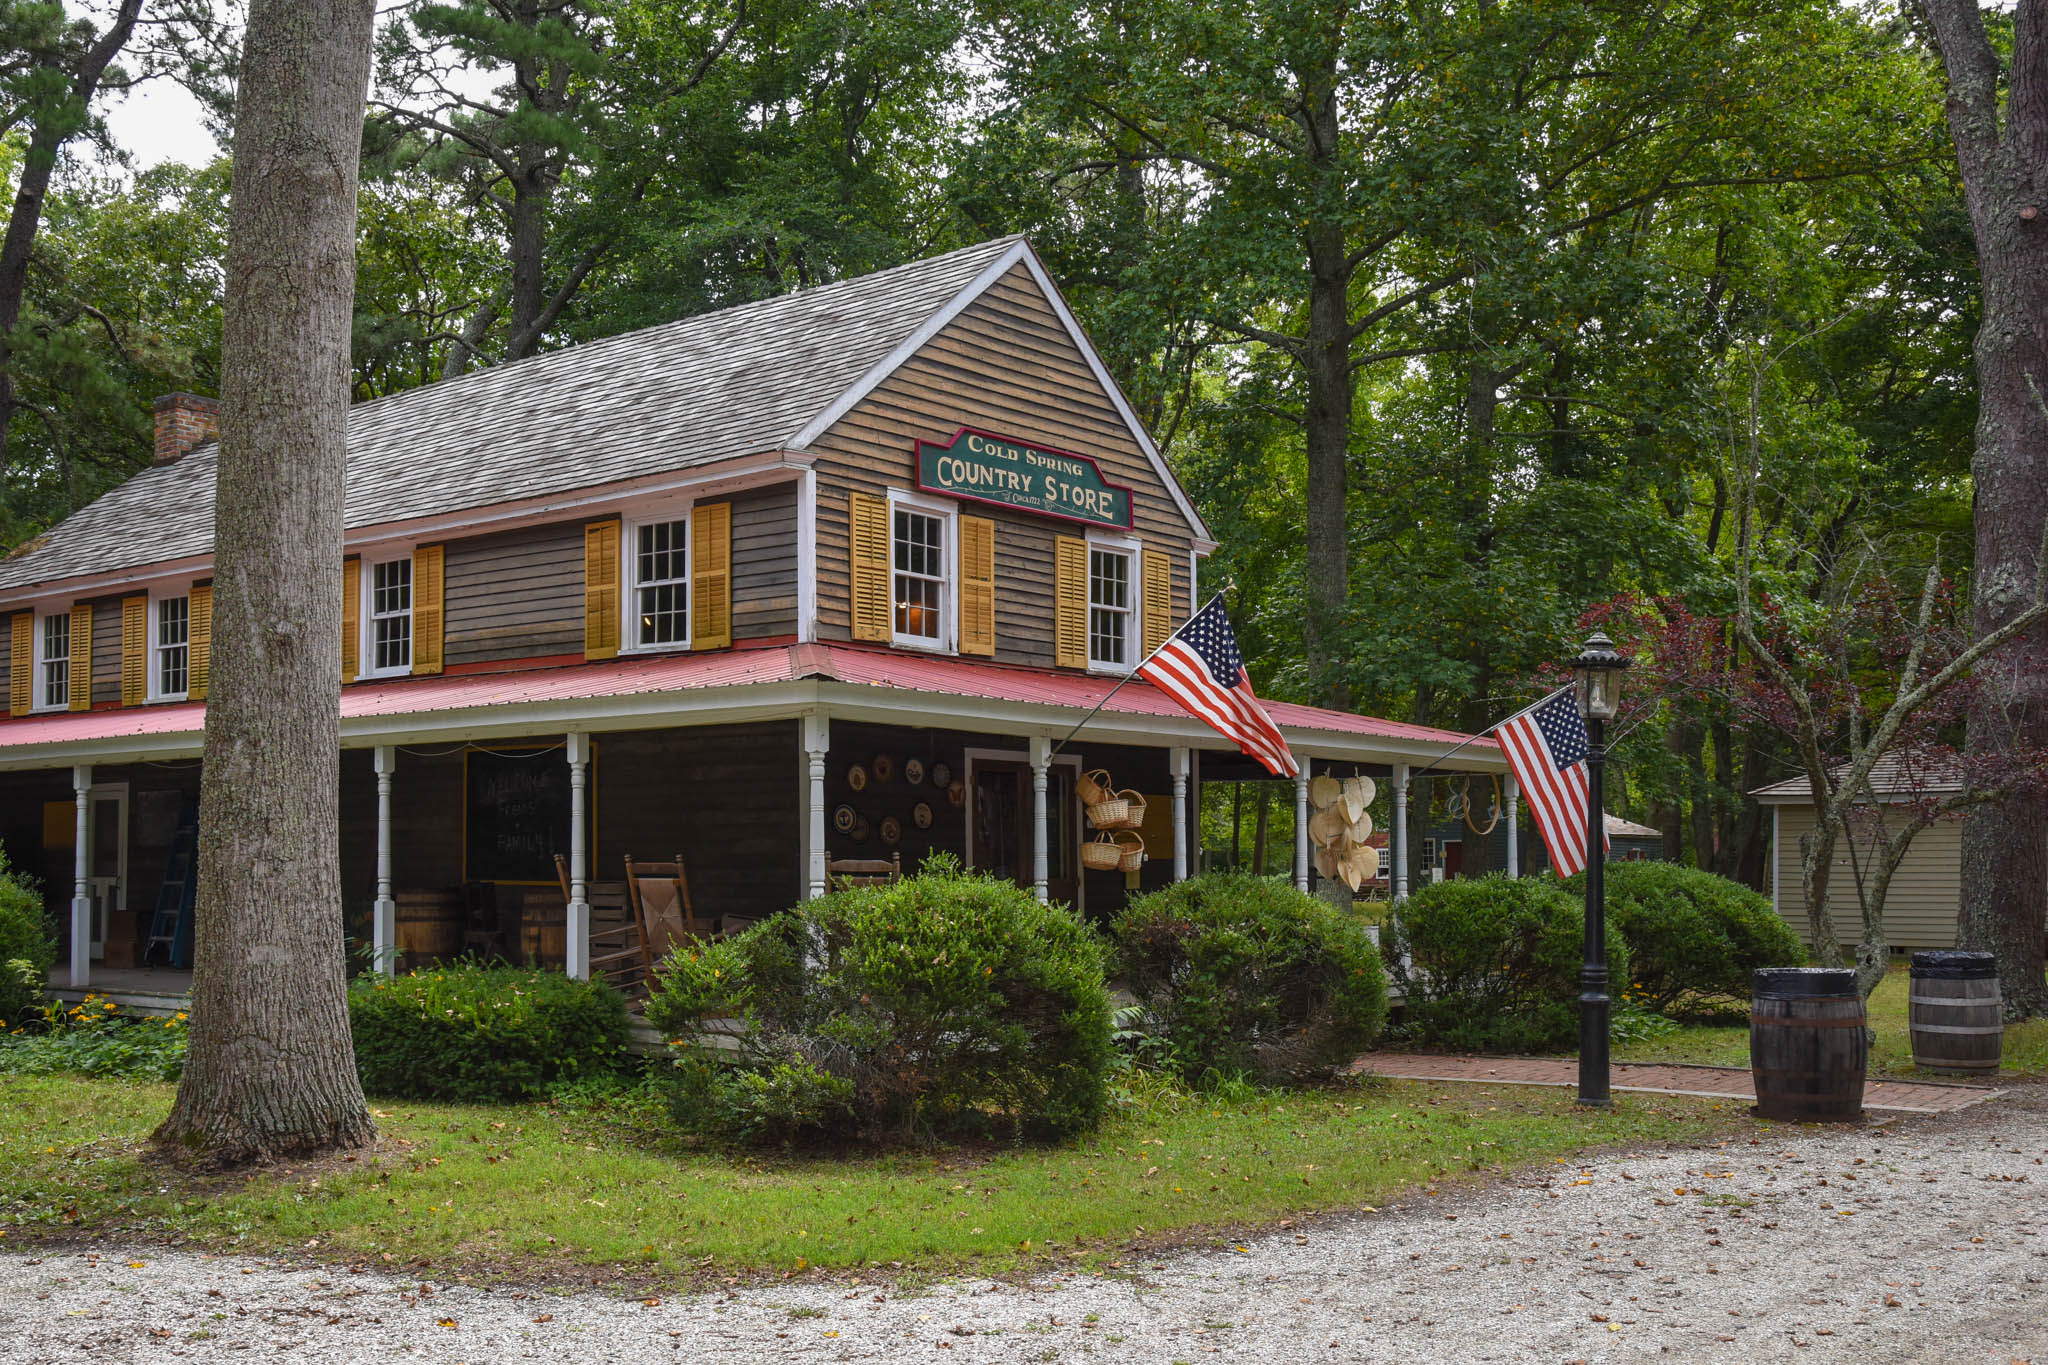 The Country store was built in 1722/1780 and was relocated to Historic Cold Spring Village in 1977.